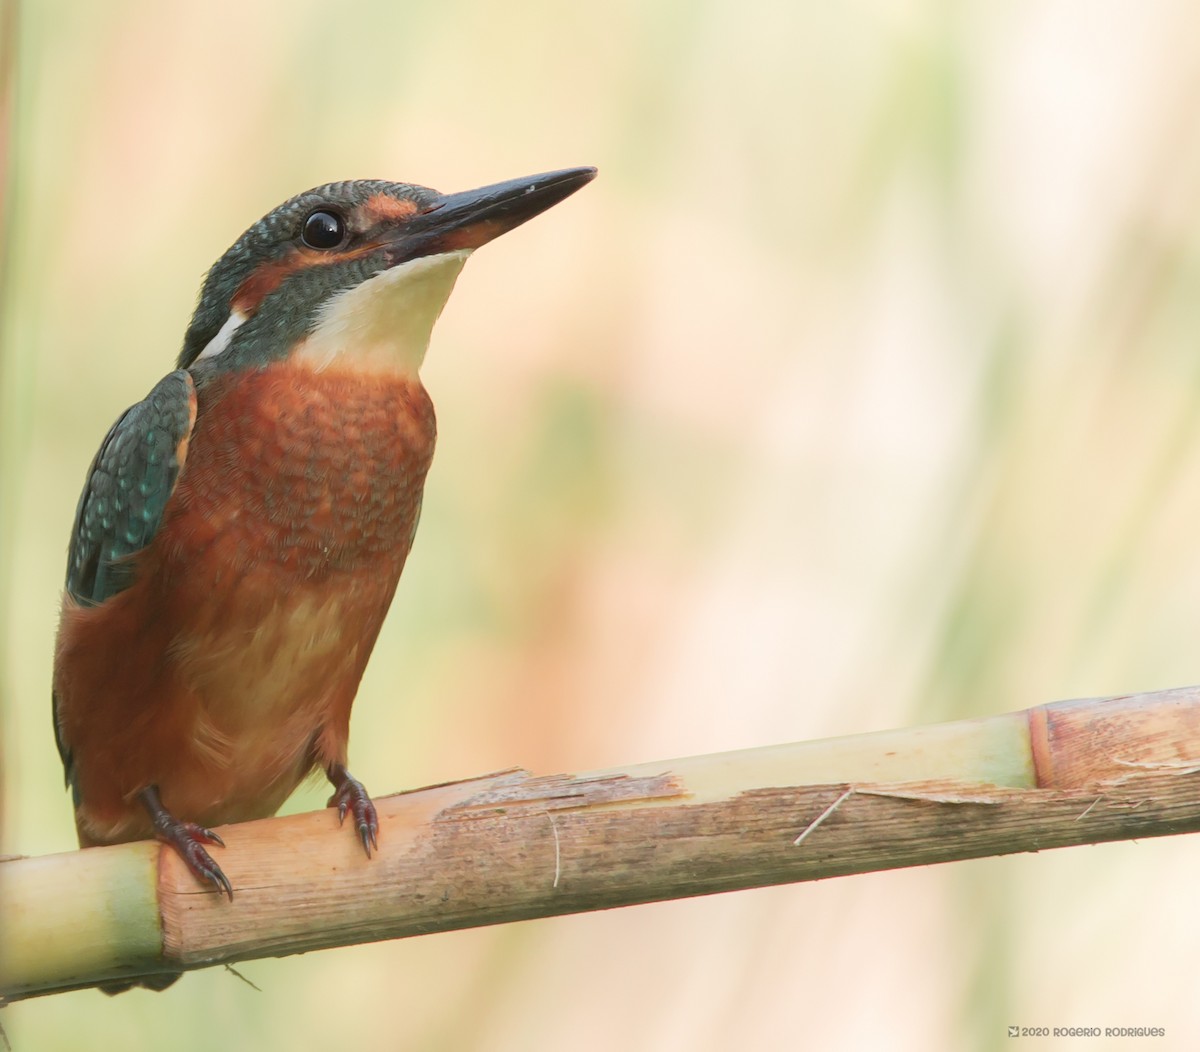 Common Kingfisher - Rogério Rodrigues